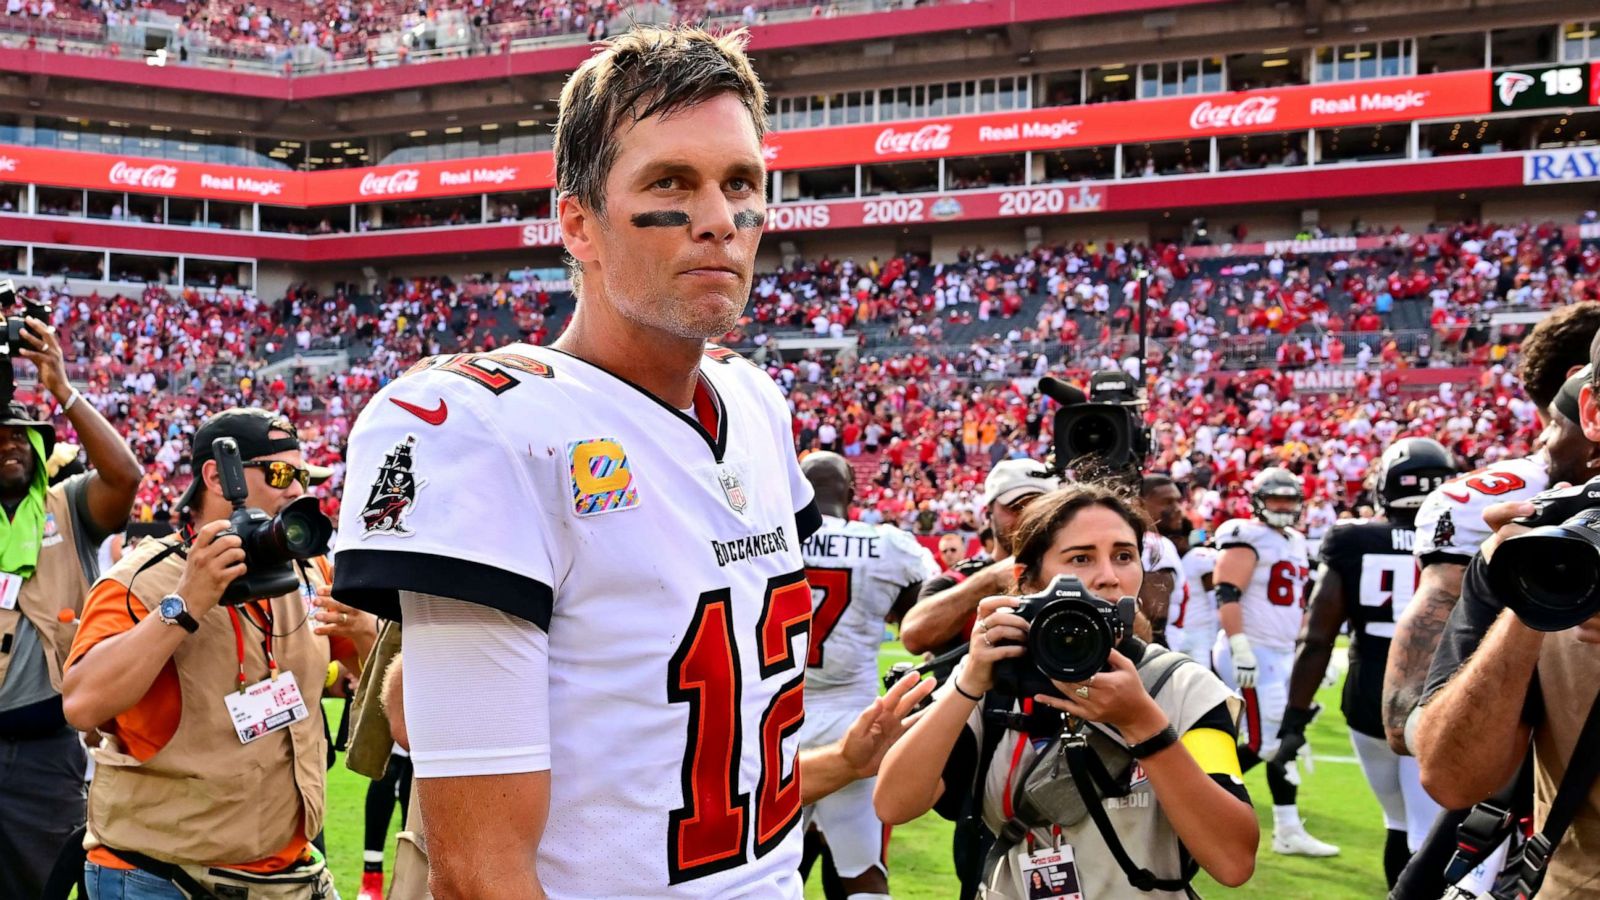 PHOTO: Tom Brady of the Tampa Bay Buccaneers walks off the field after defeating the Atlanta Falcons, 21-15, at Raymond James Stadium on Oct. 9, 2022 in Tampa, Fla.